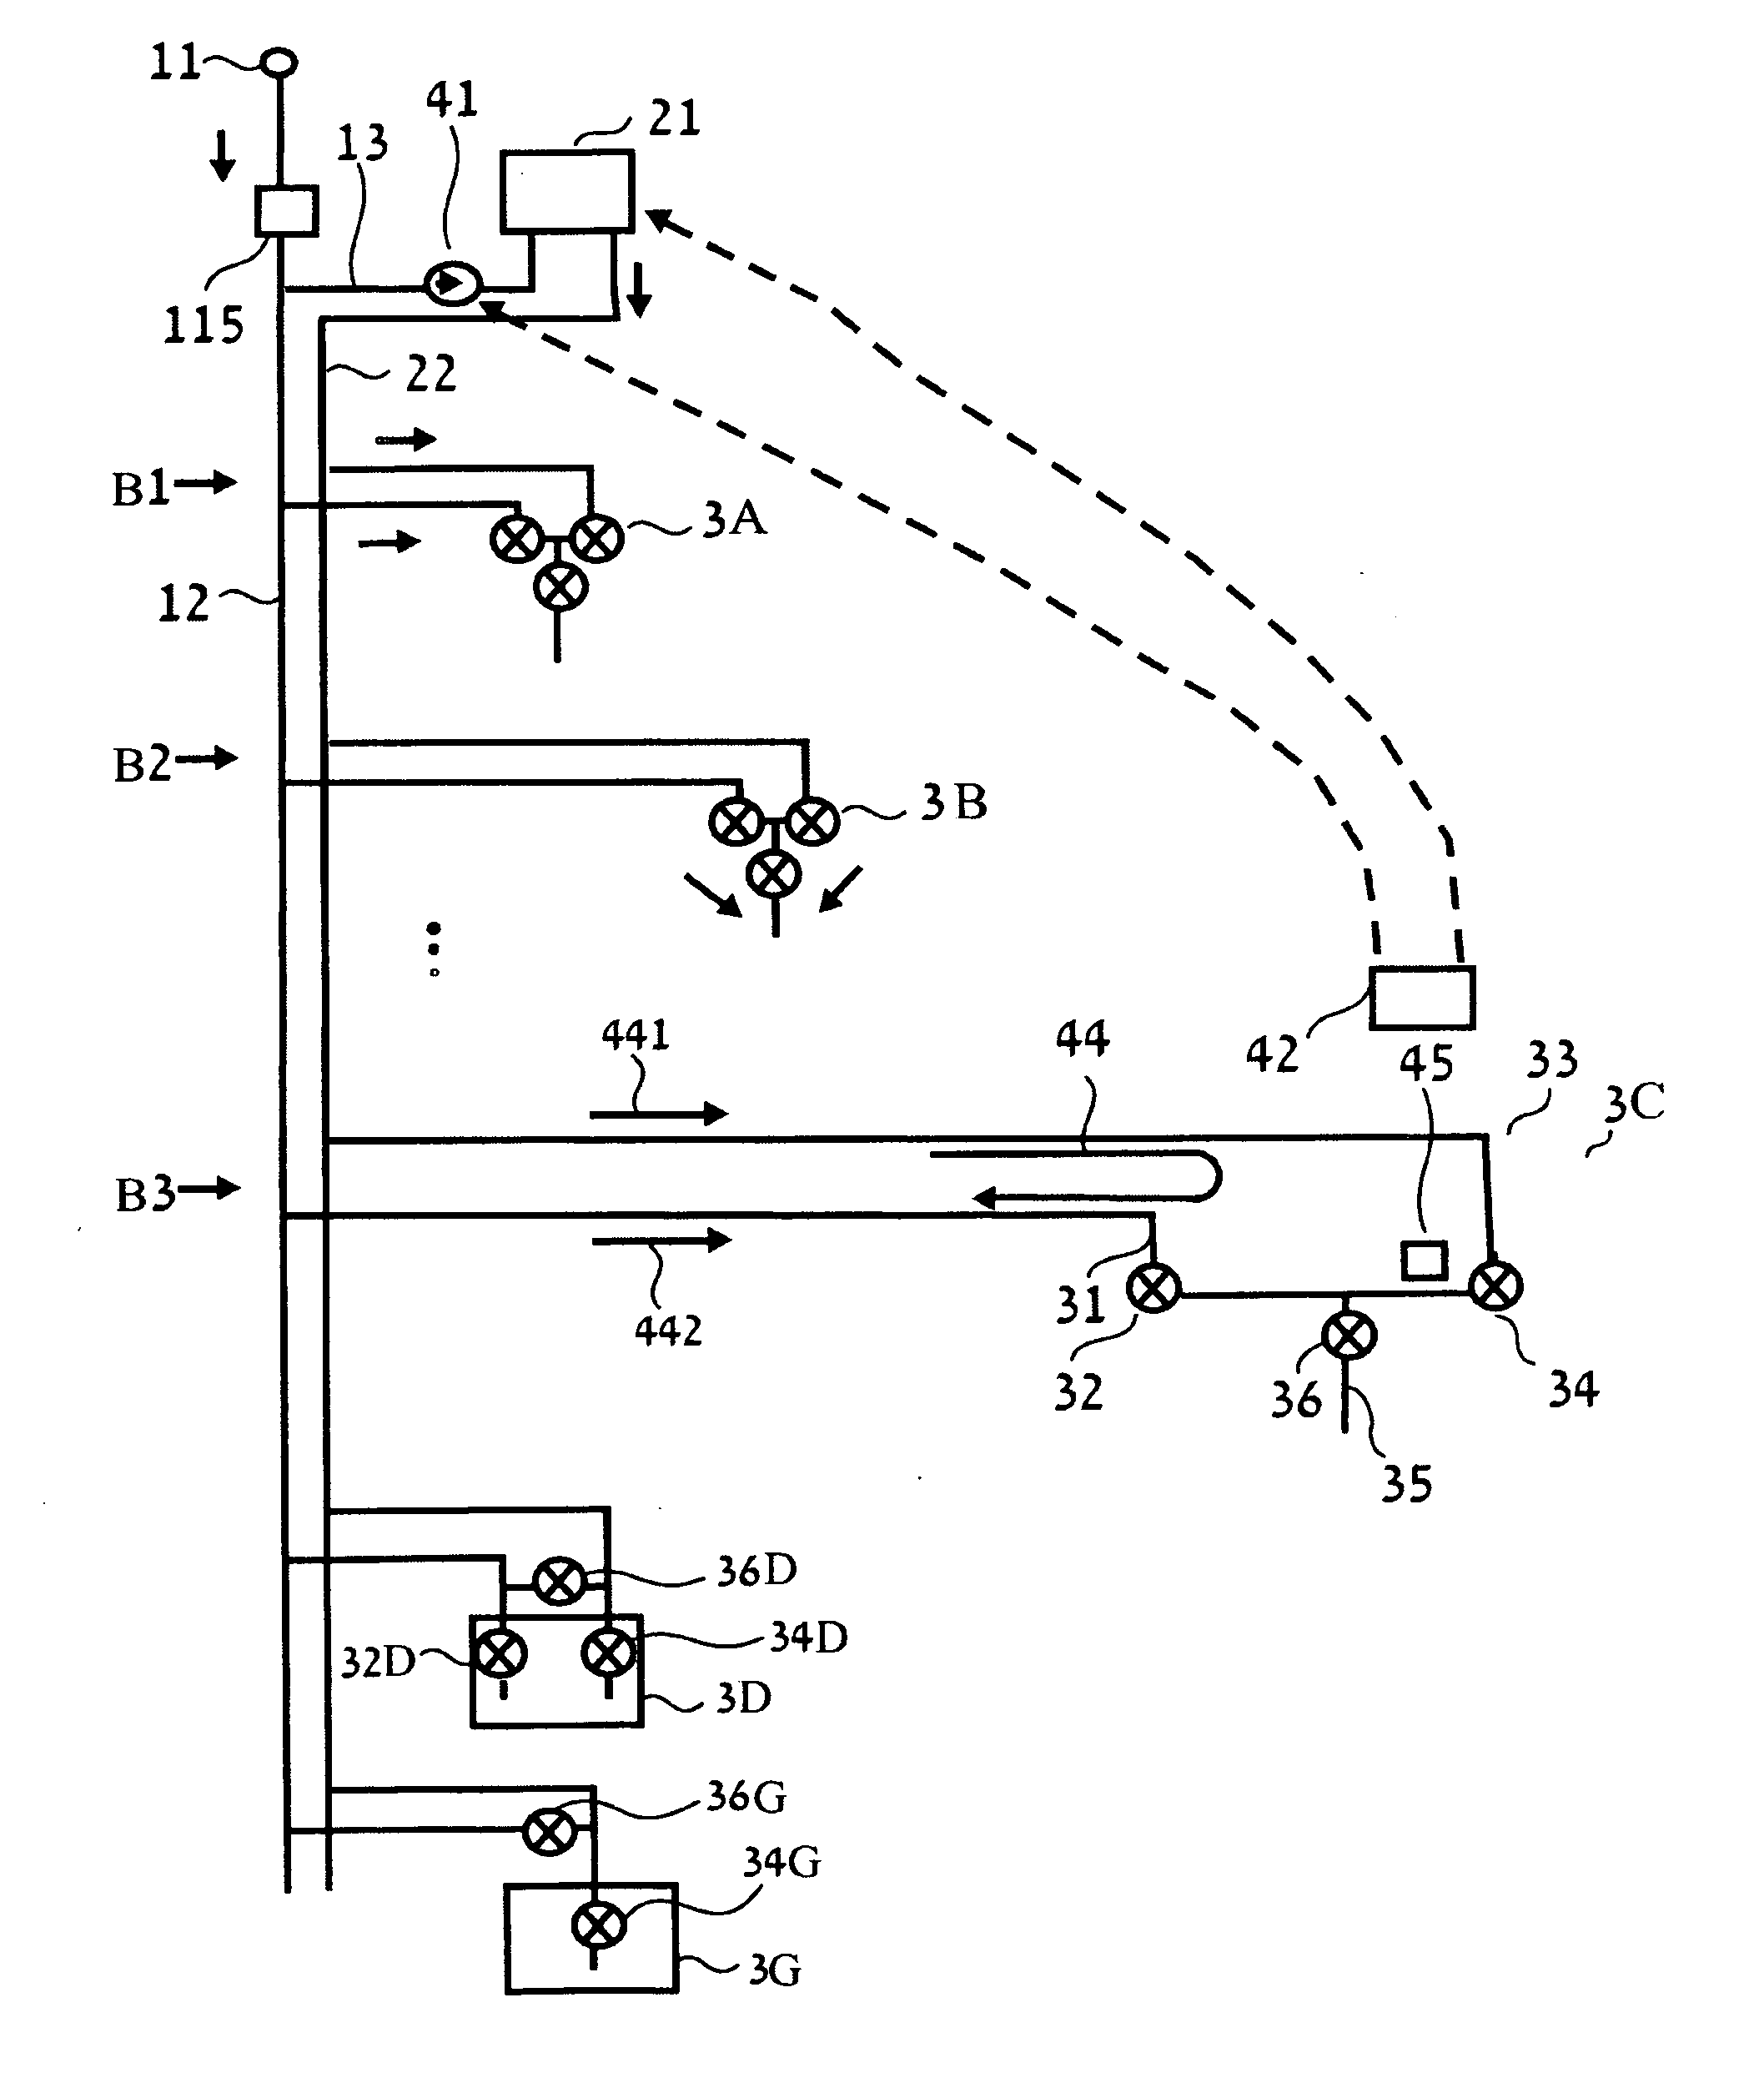 Water supply system with recirculation